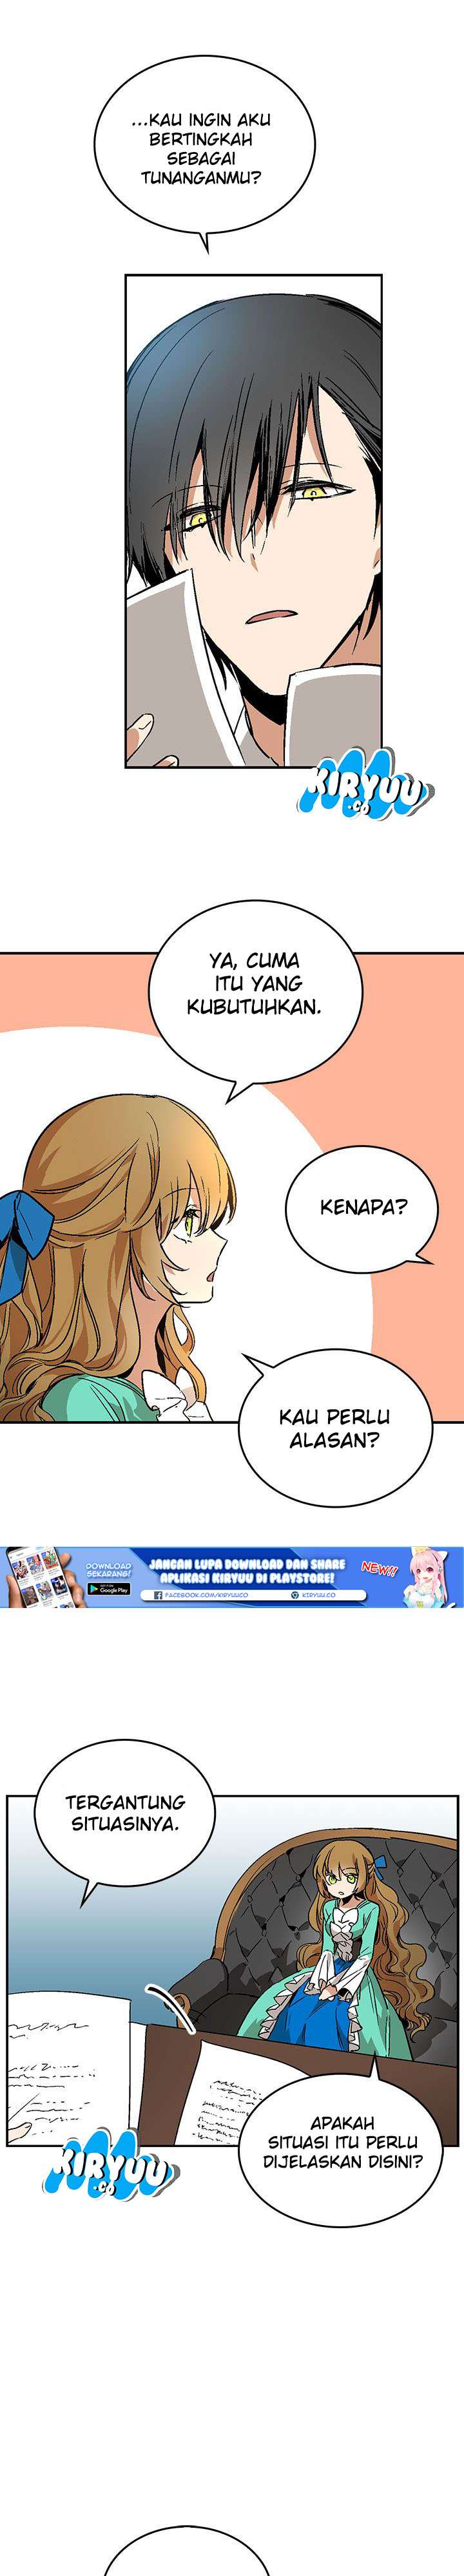 The Reason Why Raeliana Ended Up at the Duke’s Mansion Chapter 7 Bahasa Indonesia